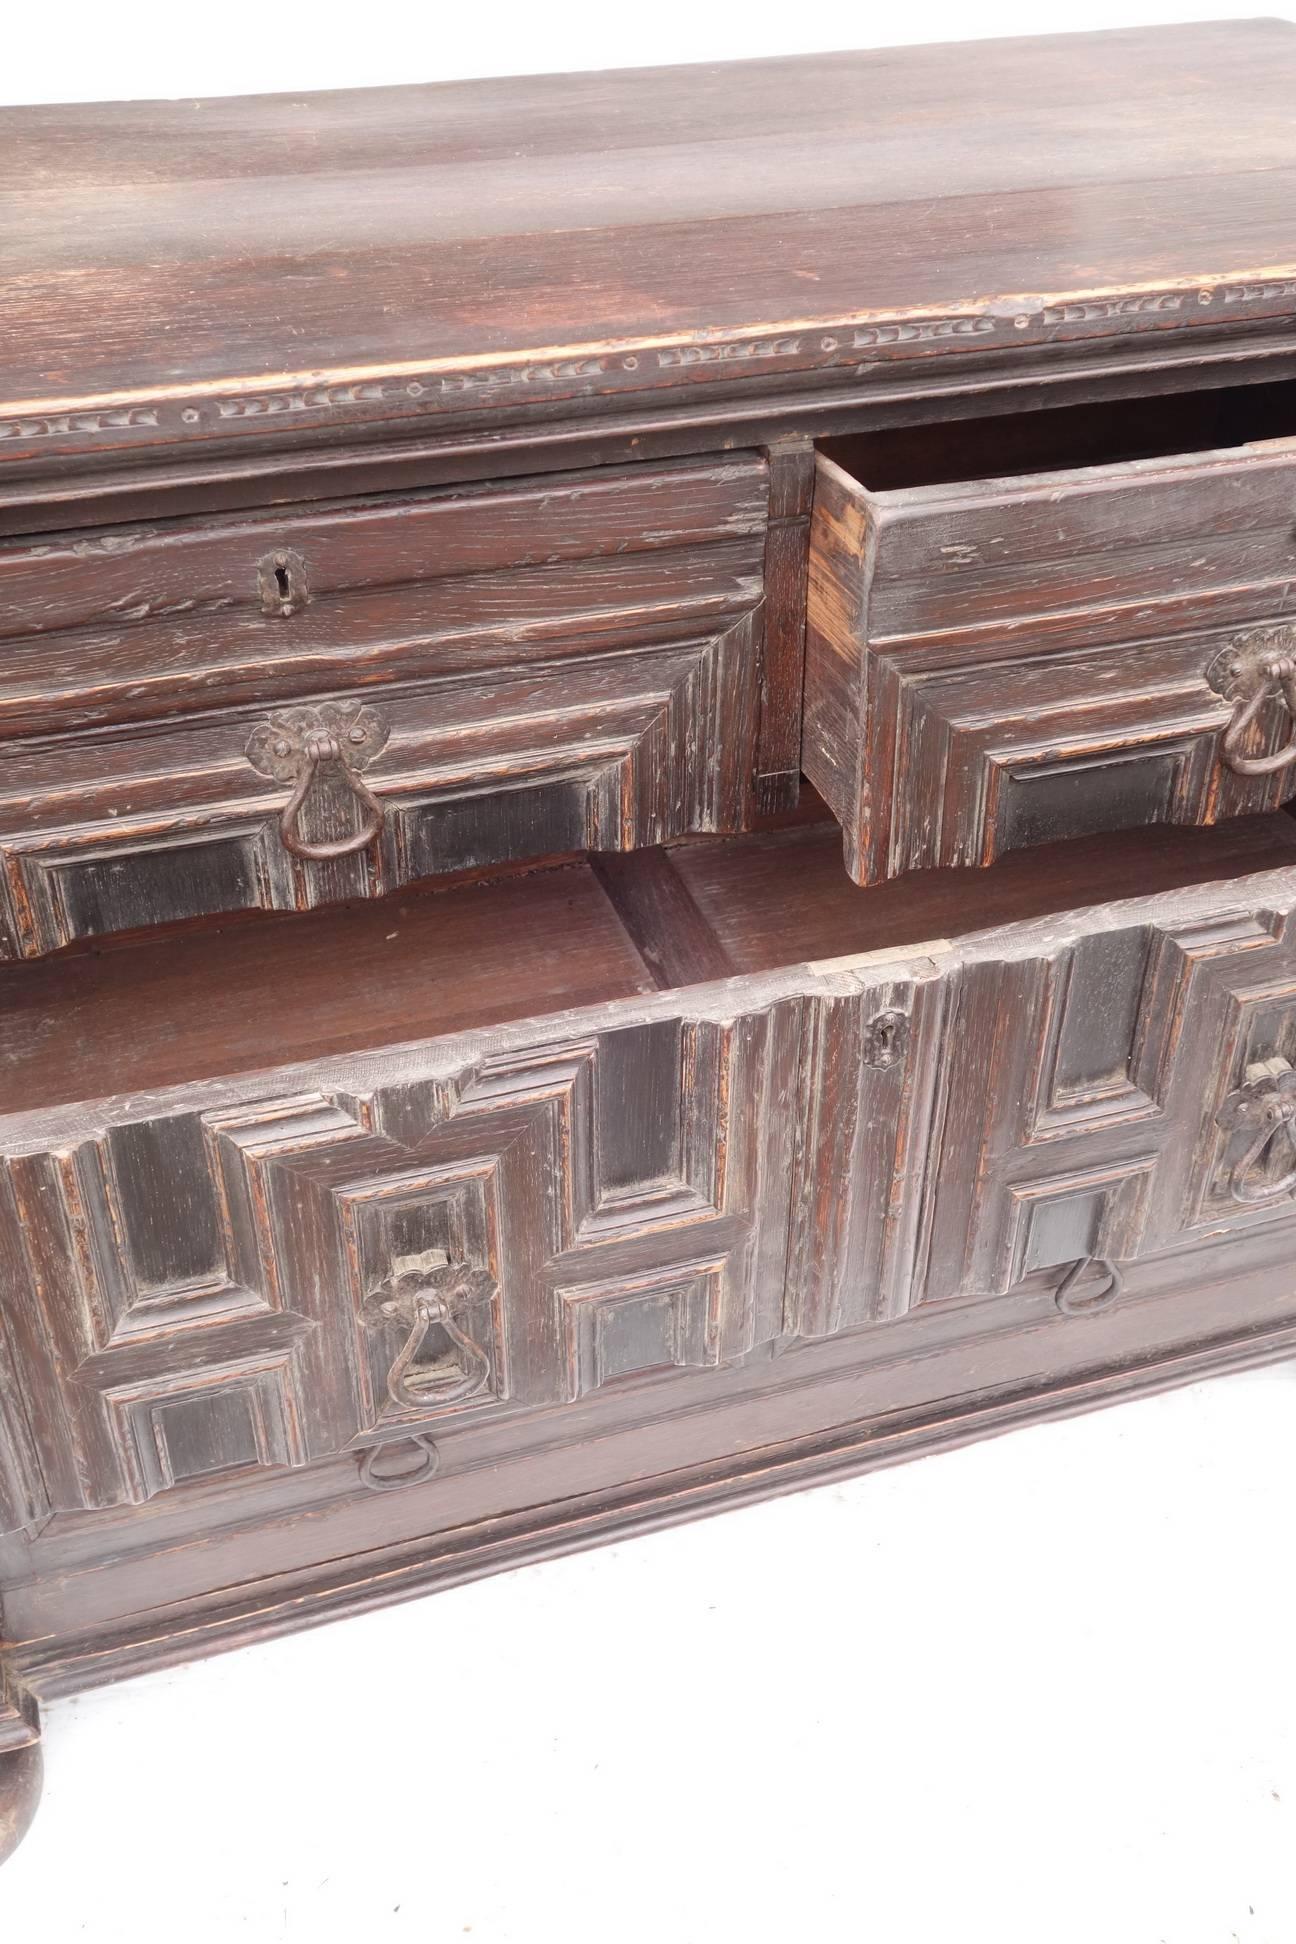 Mahogany dresser with four drawers that look like door when closed. Hand-carved, early 19th century piece on original large bun feet. Original hardware.